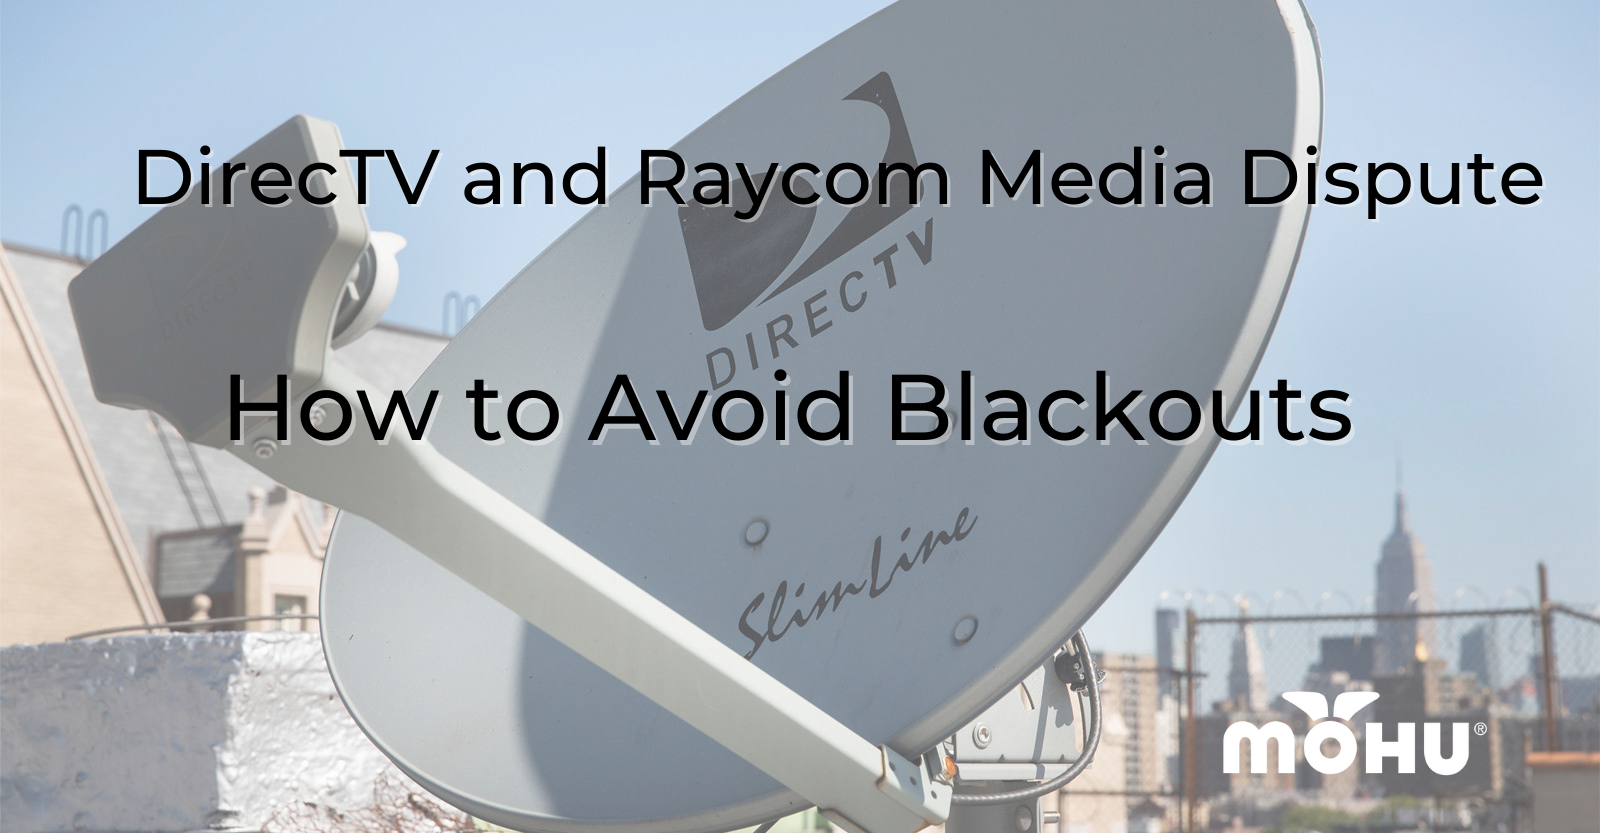 DirecTV and Raycom Media Dispute How to Avoid Blackouts